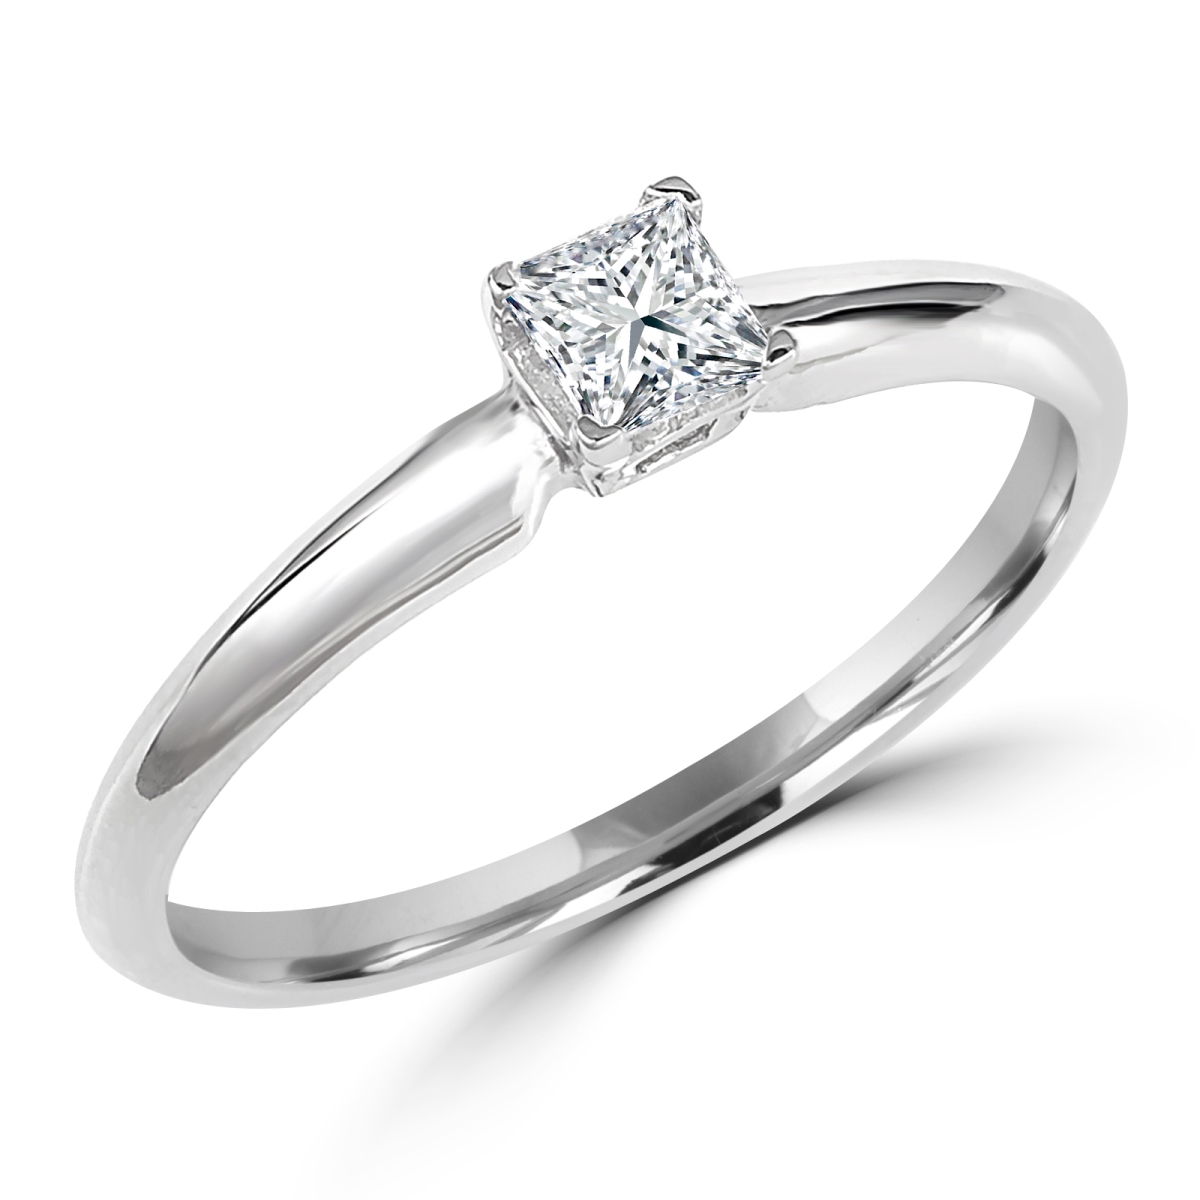 Picture of Majesty Diamonds MD170184-7.75 0.5 CT Princess Diamond Solitaire Engagement Ring in 10K White Gold - 7.75